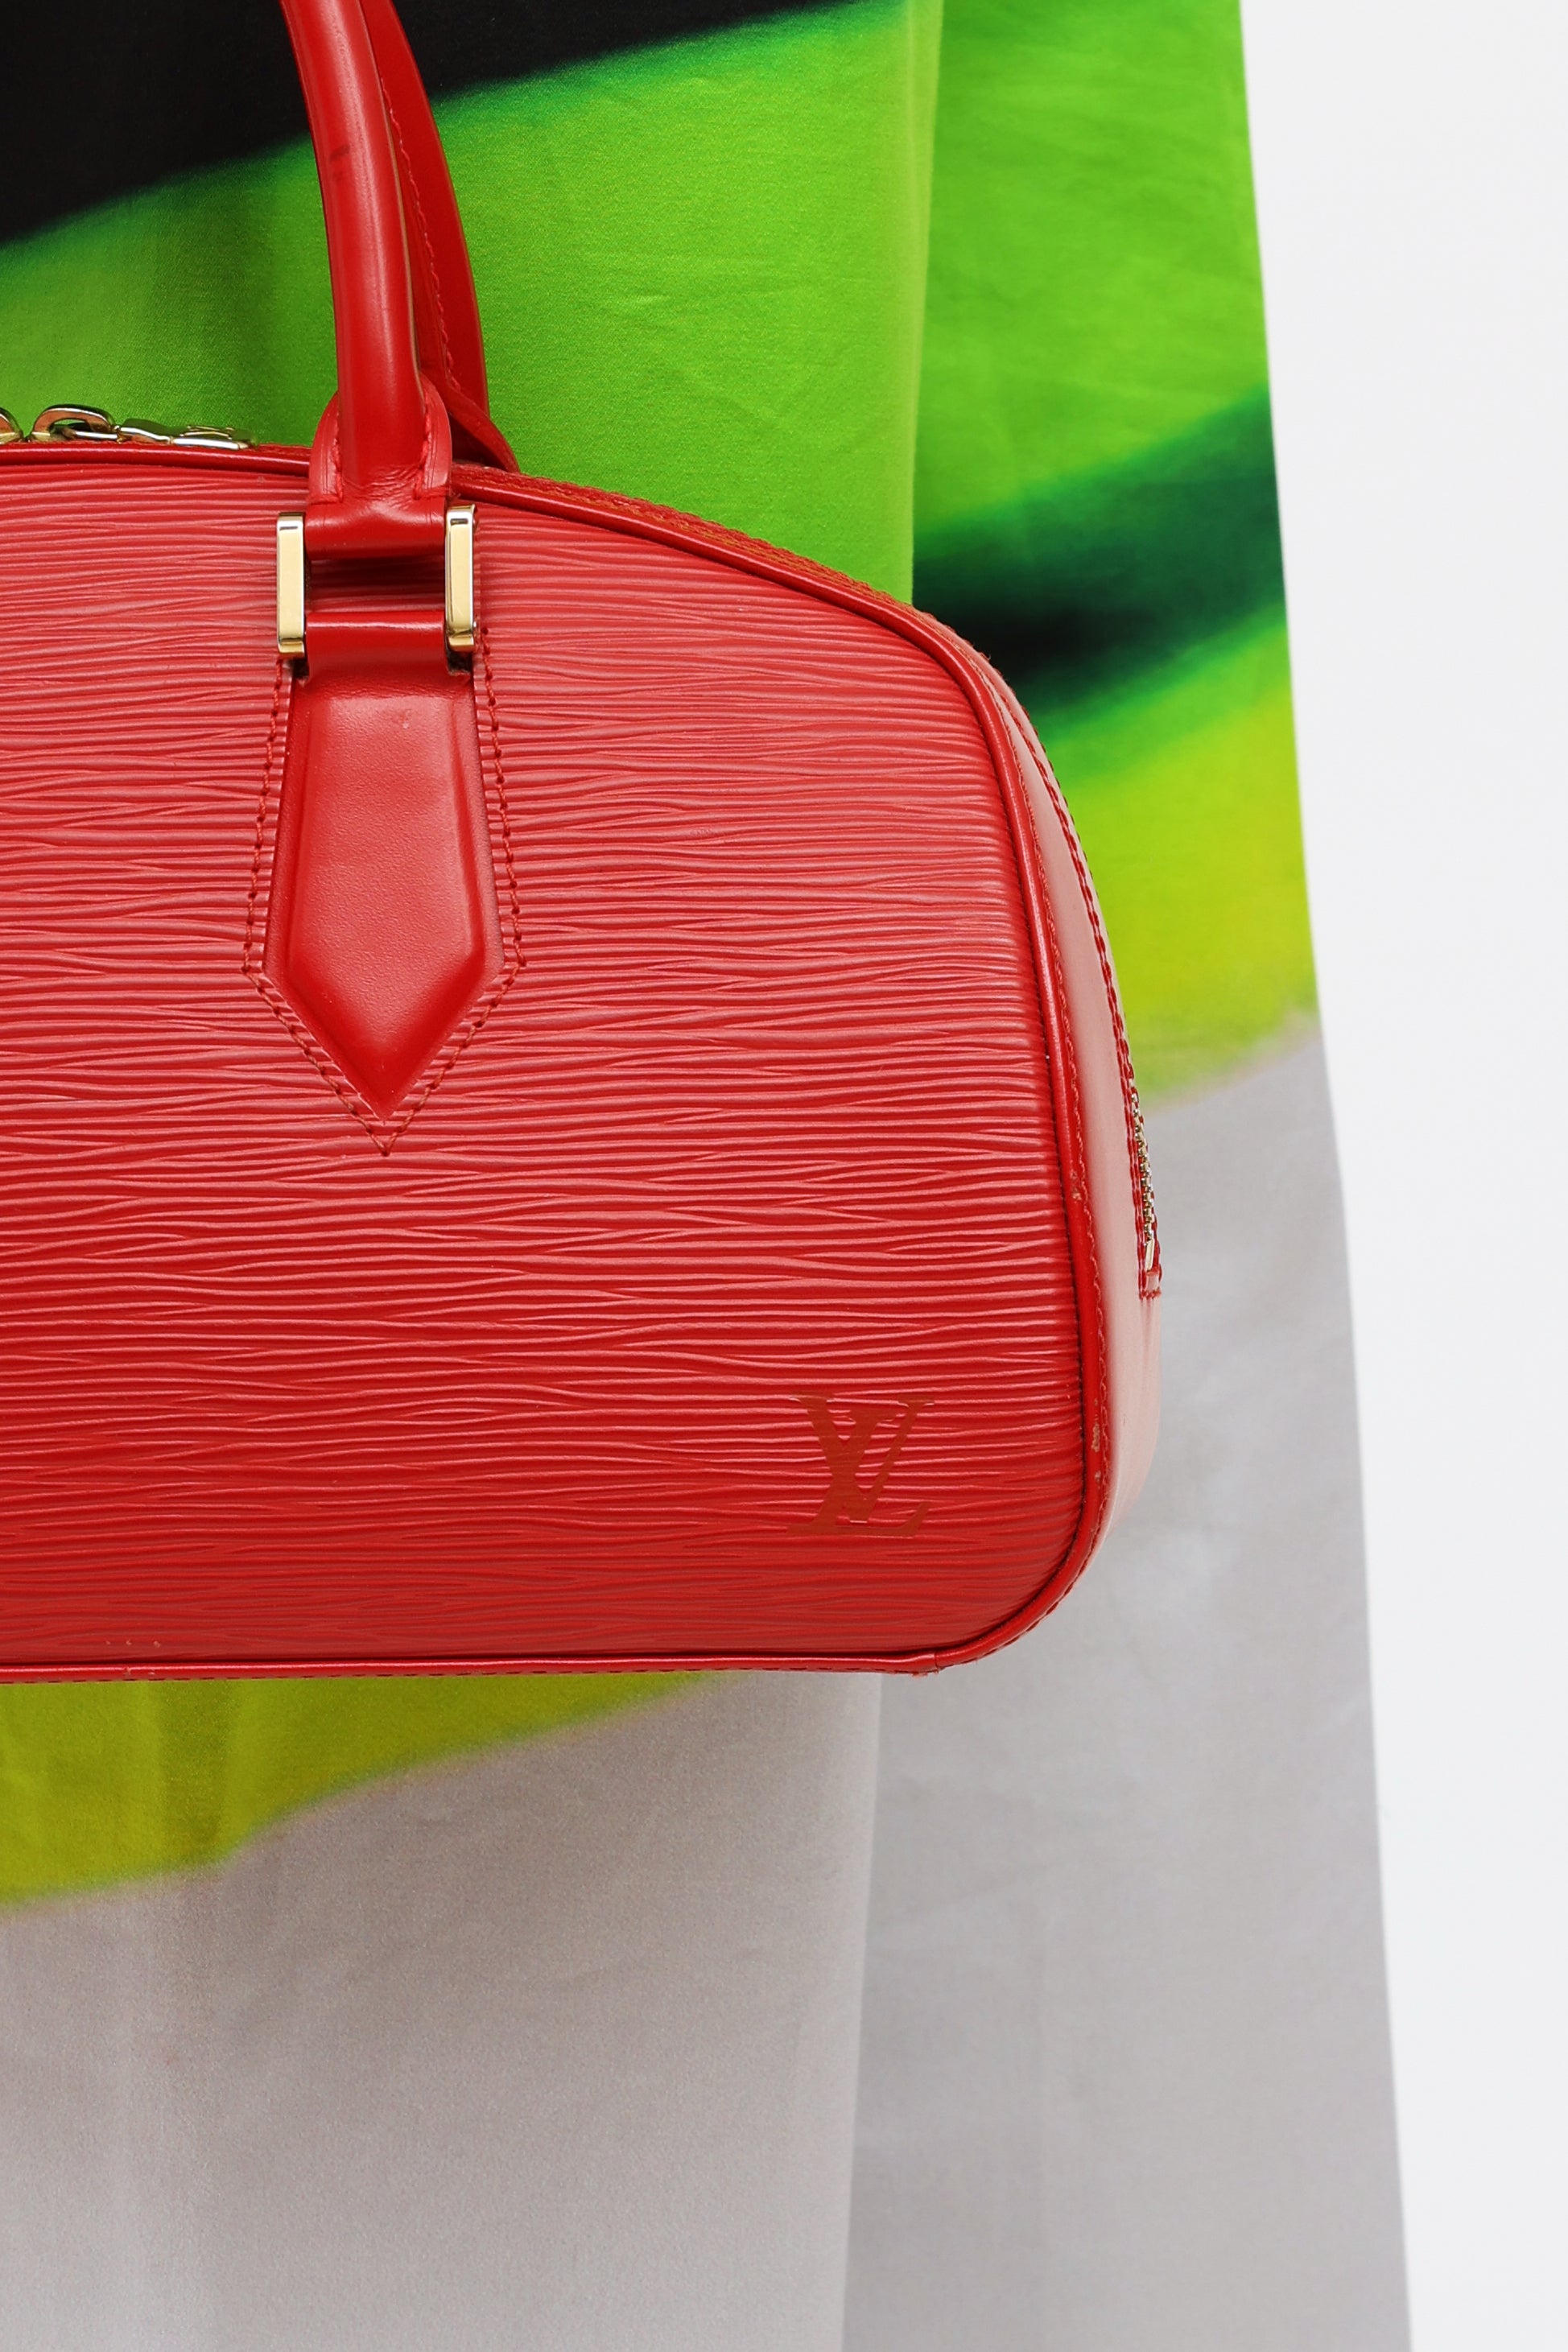 The perfect shade of red ♥️ #LouisVuitton Epi Jasmin top handle